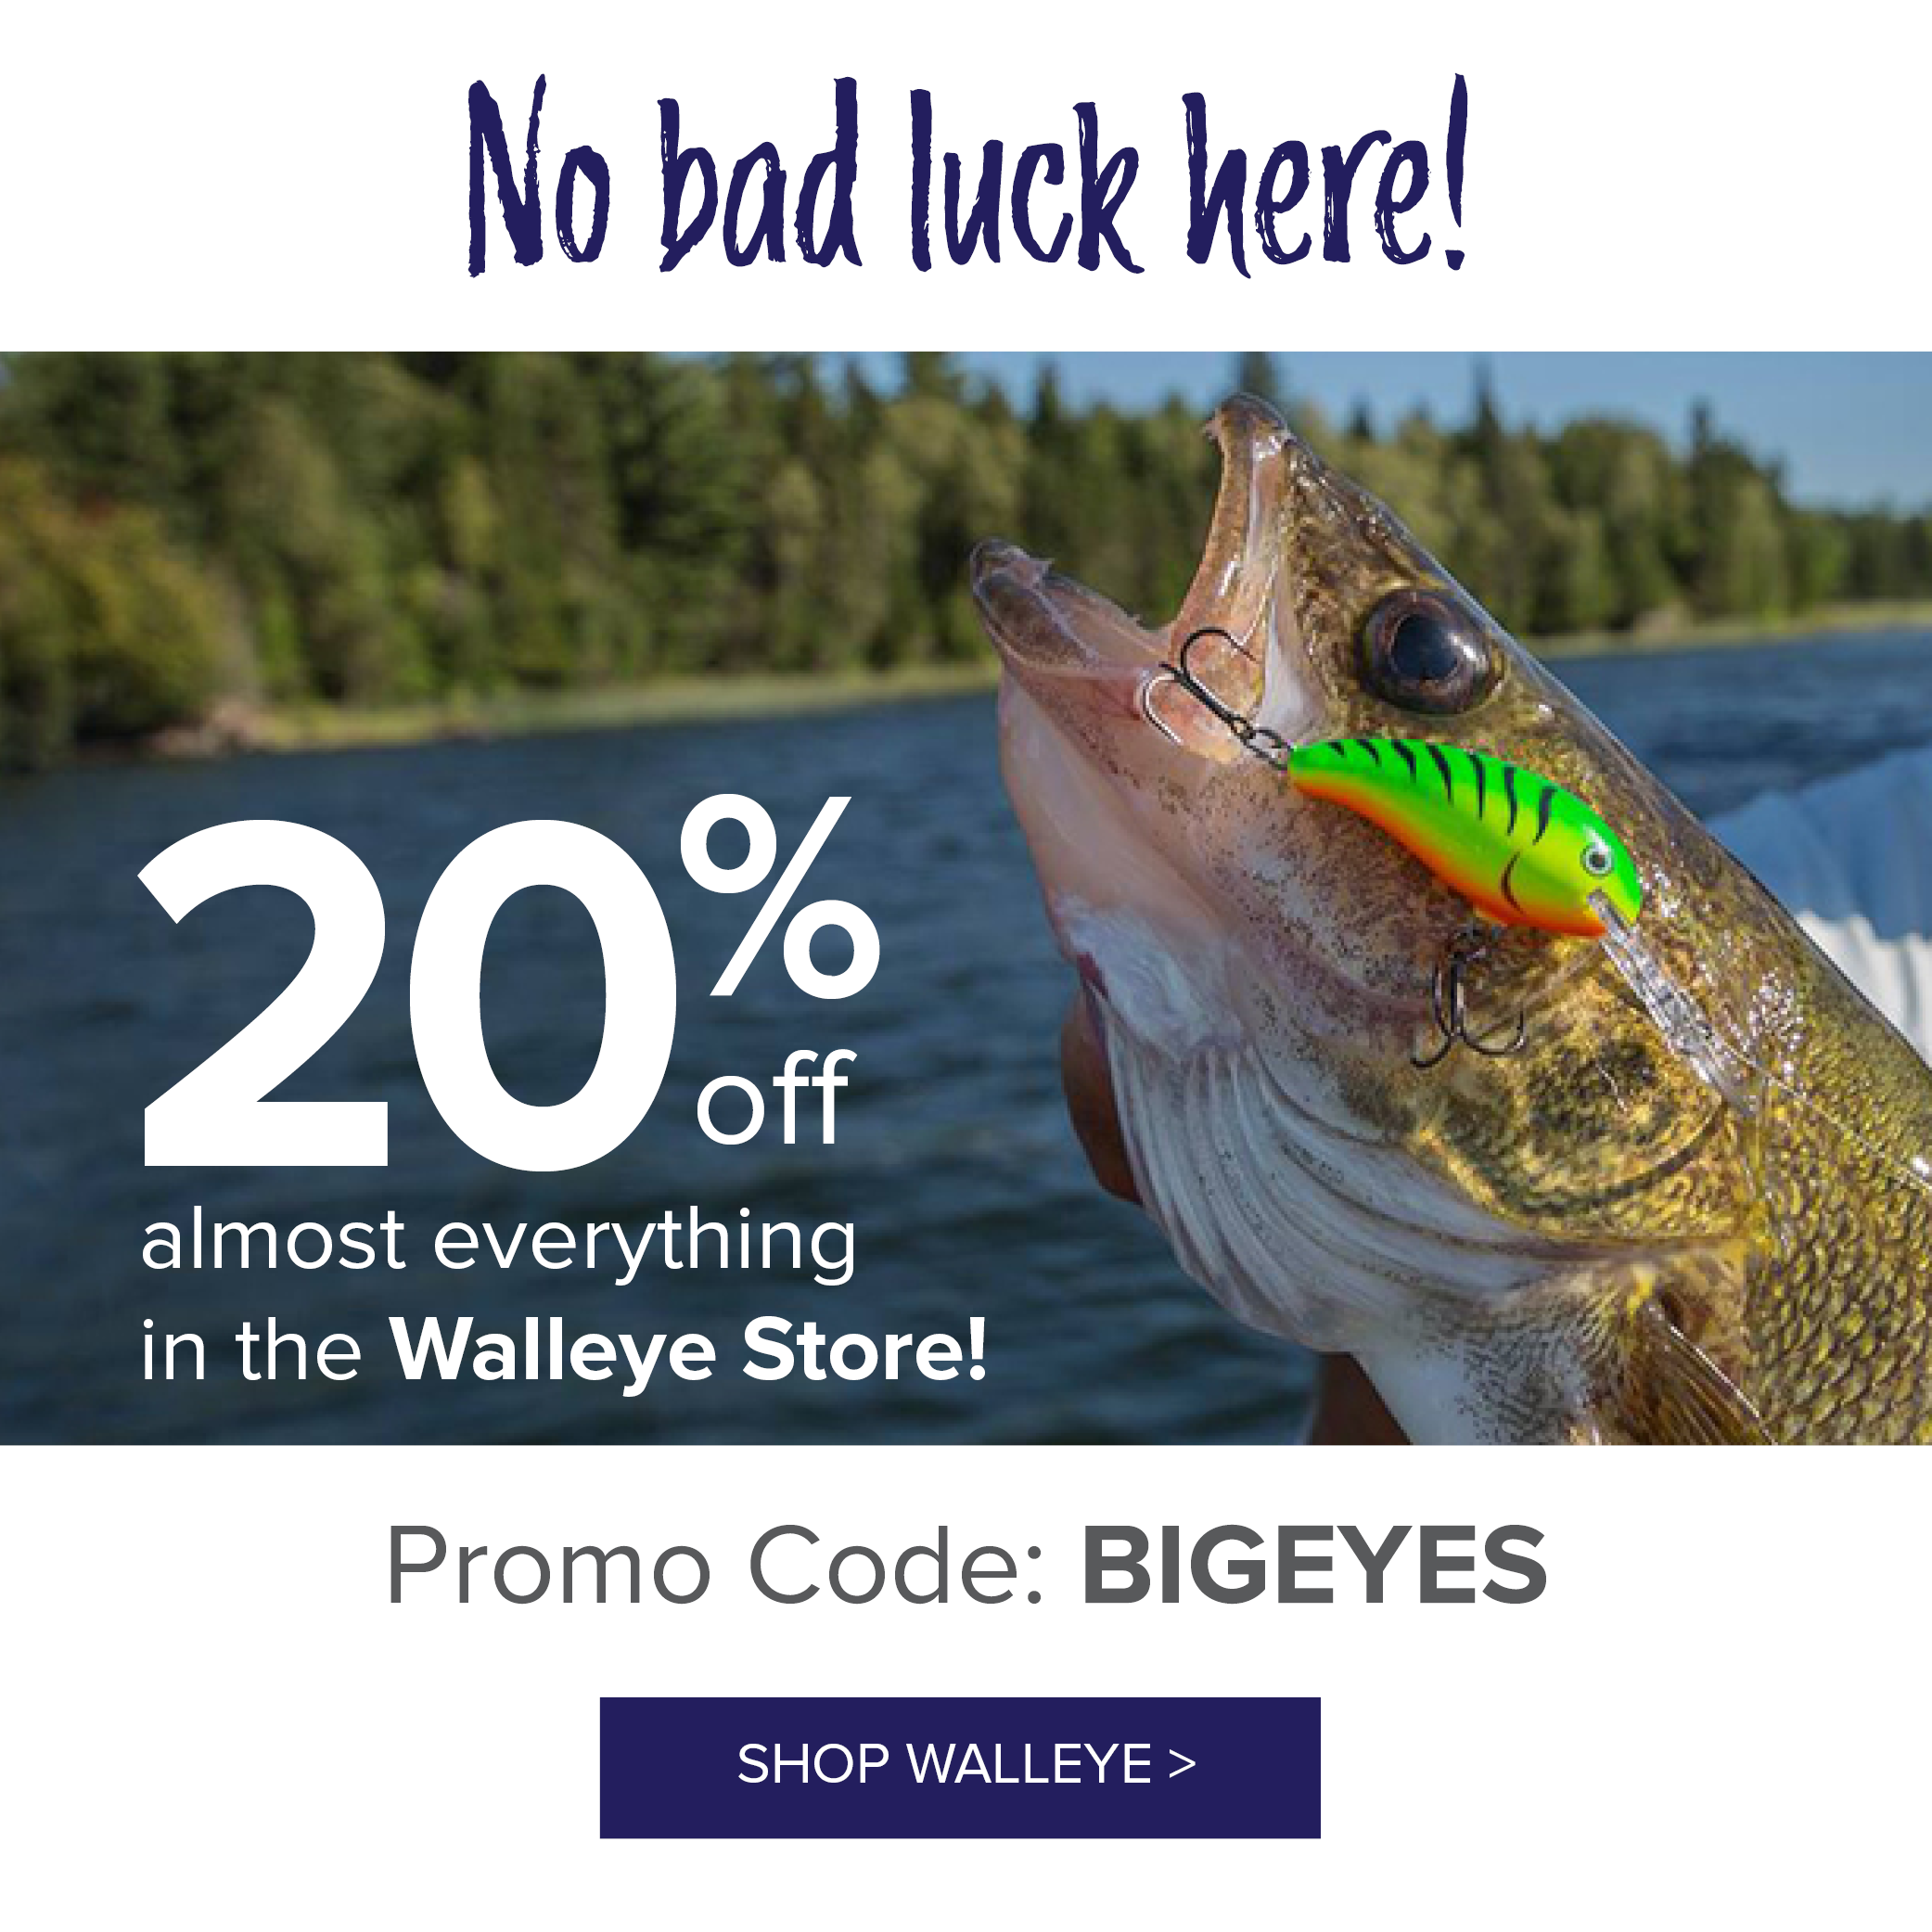 Save 20% off almost everything in the Walleye Store